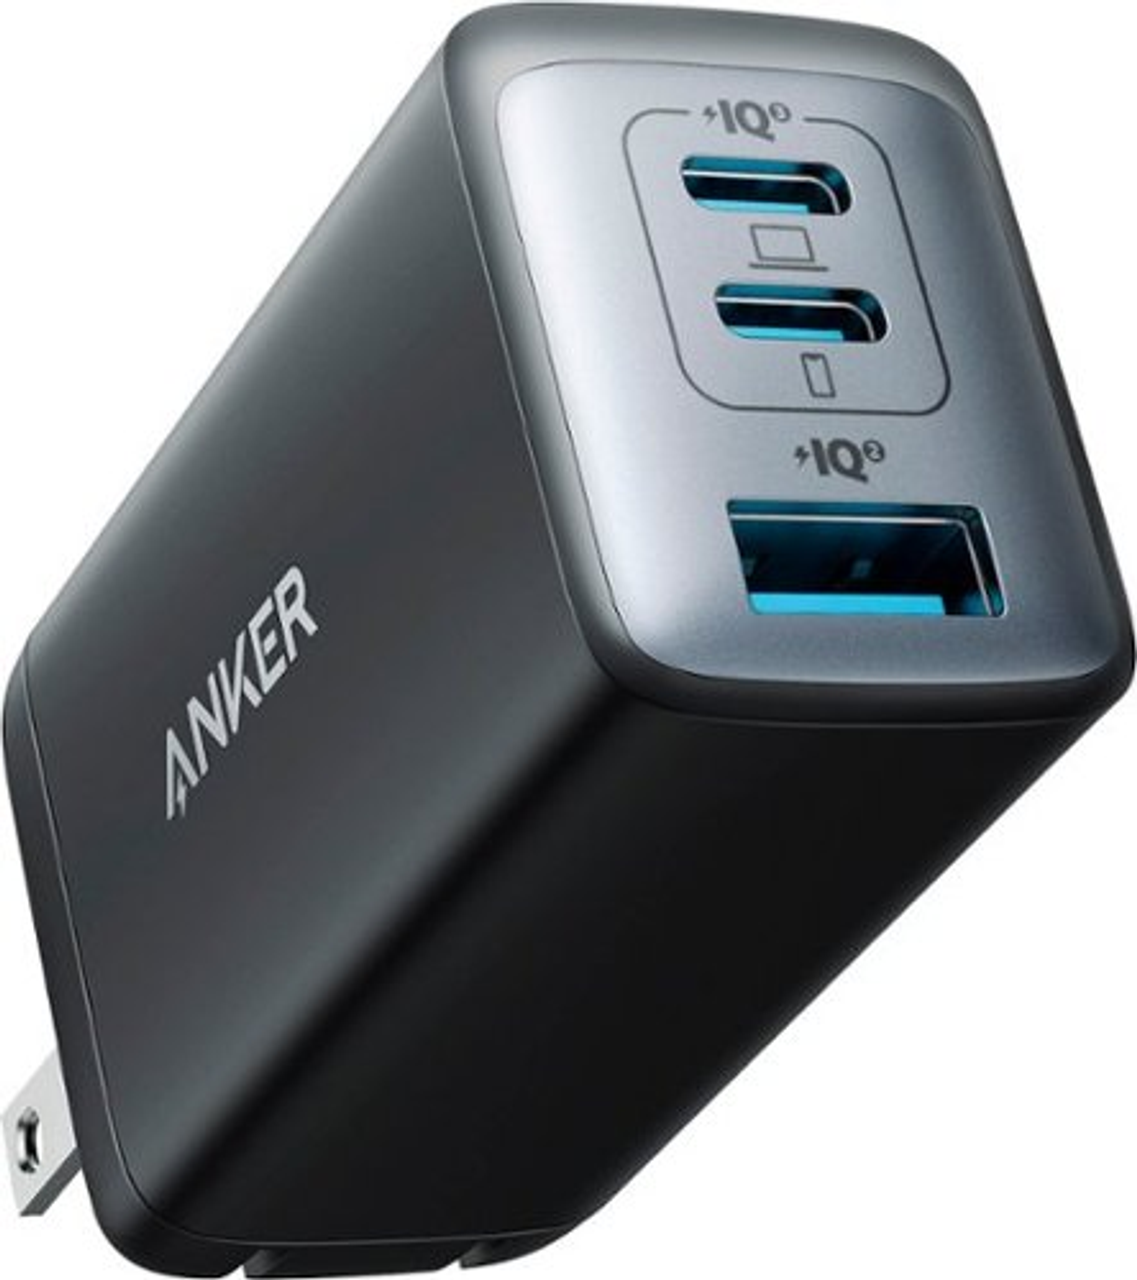 Anker - 735 3-port USB charger (up to 65W total) - Black